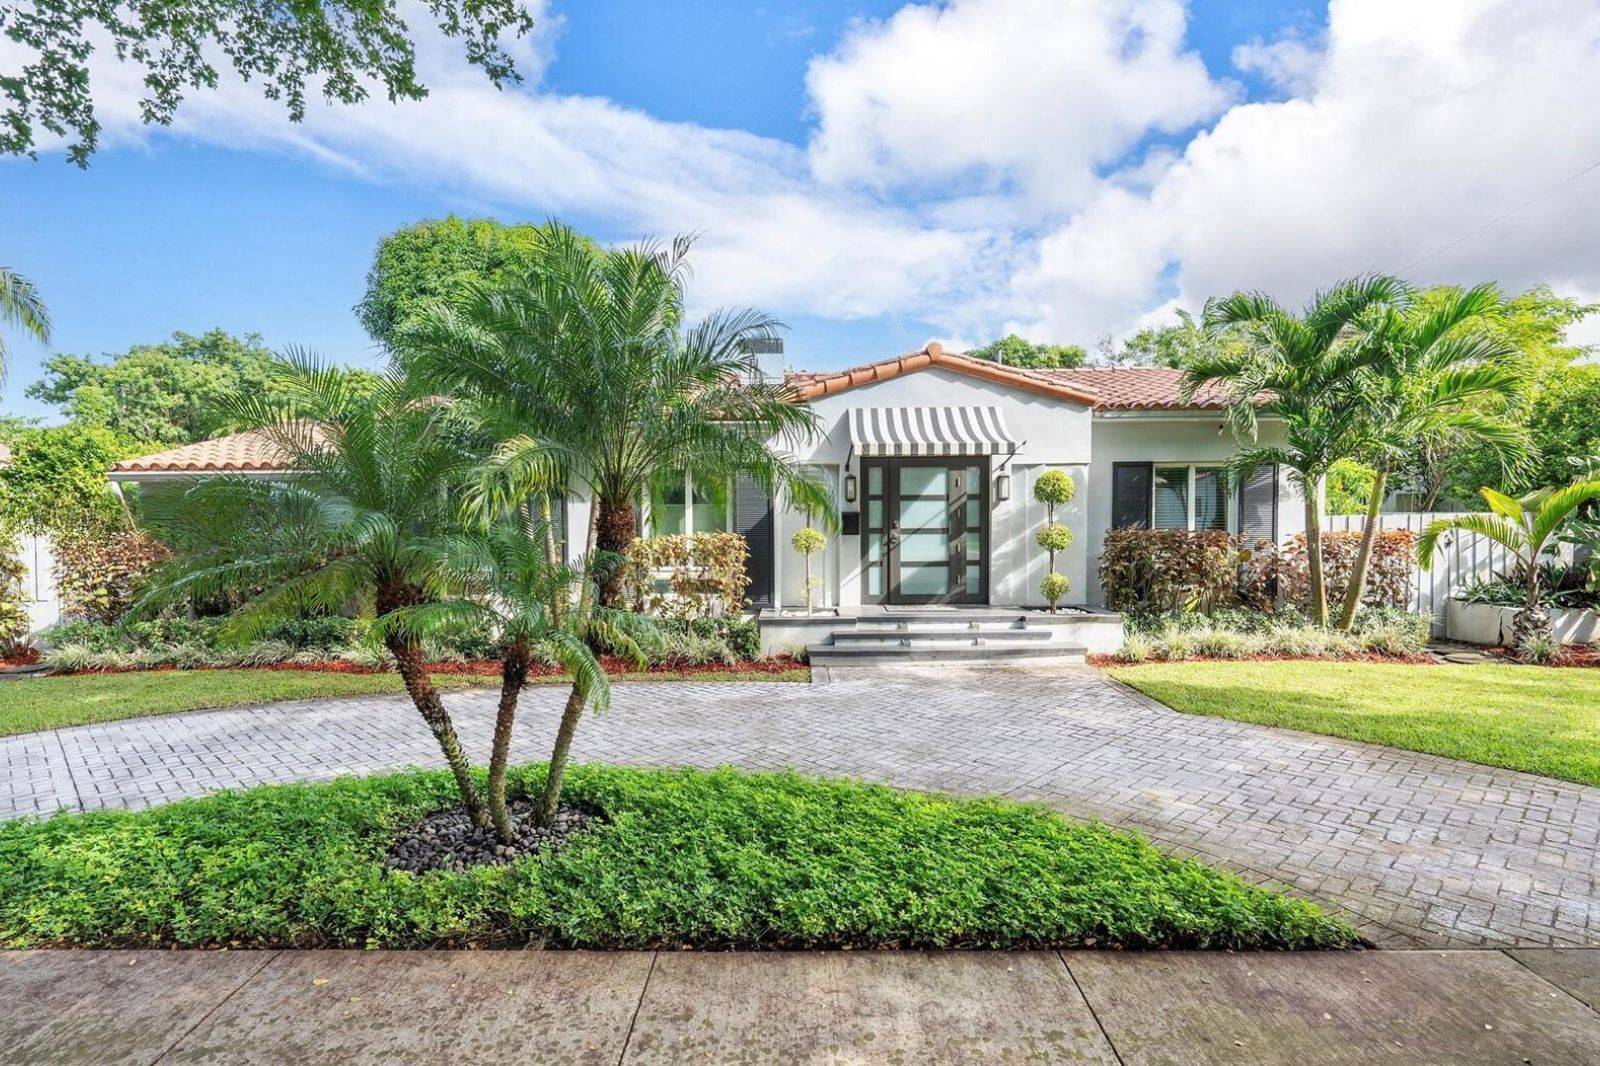 Charming Miami Shores residence | 3 Beds | 2 Baths | 1,912 sqft